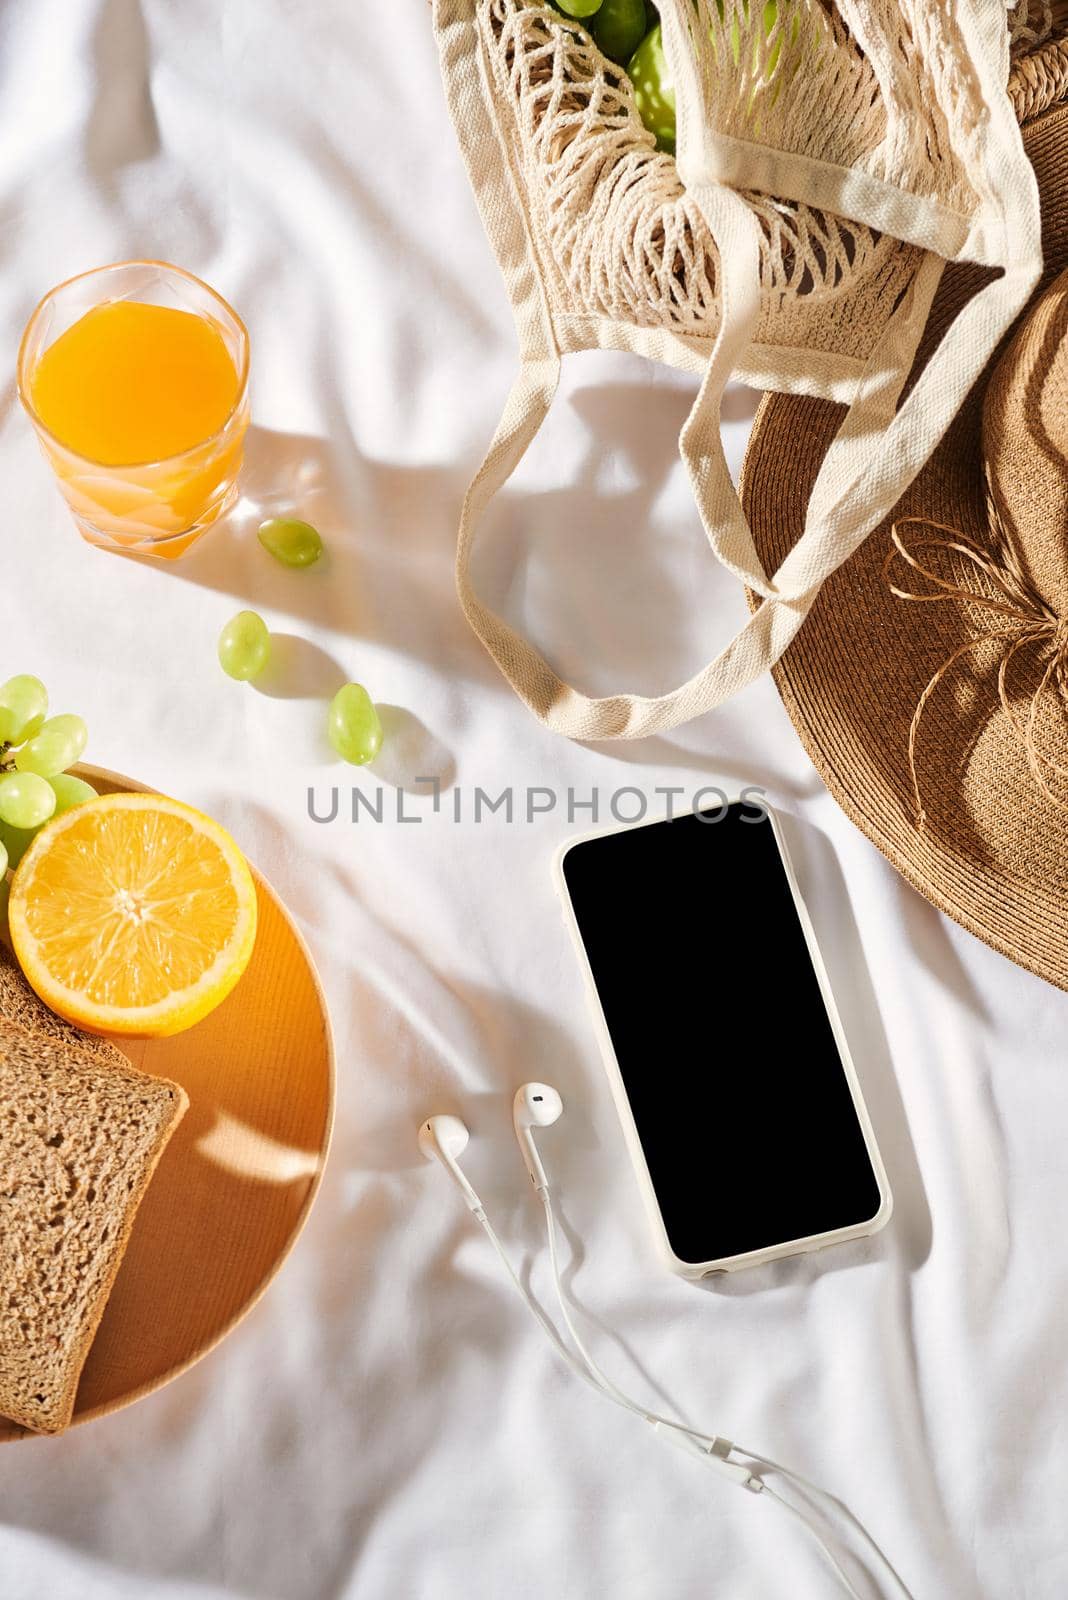 Picnic background with bag, bread and straw hat, glasses, orange juice, phone on white background.